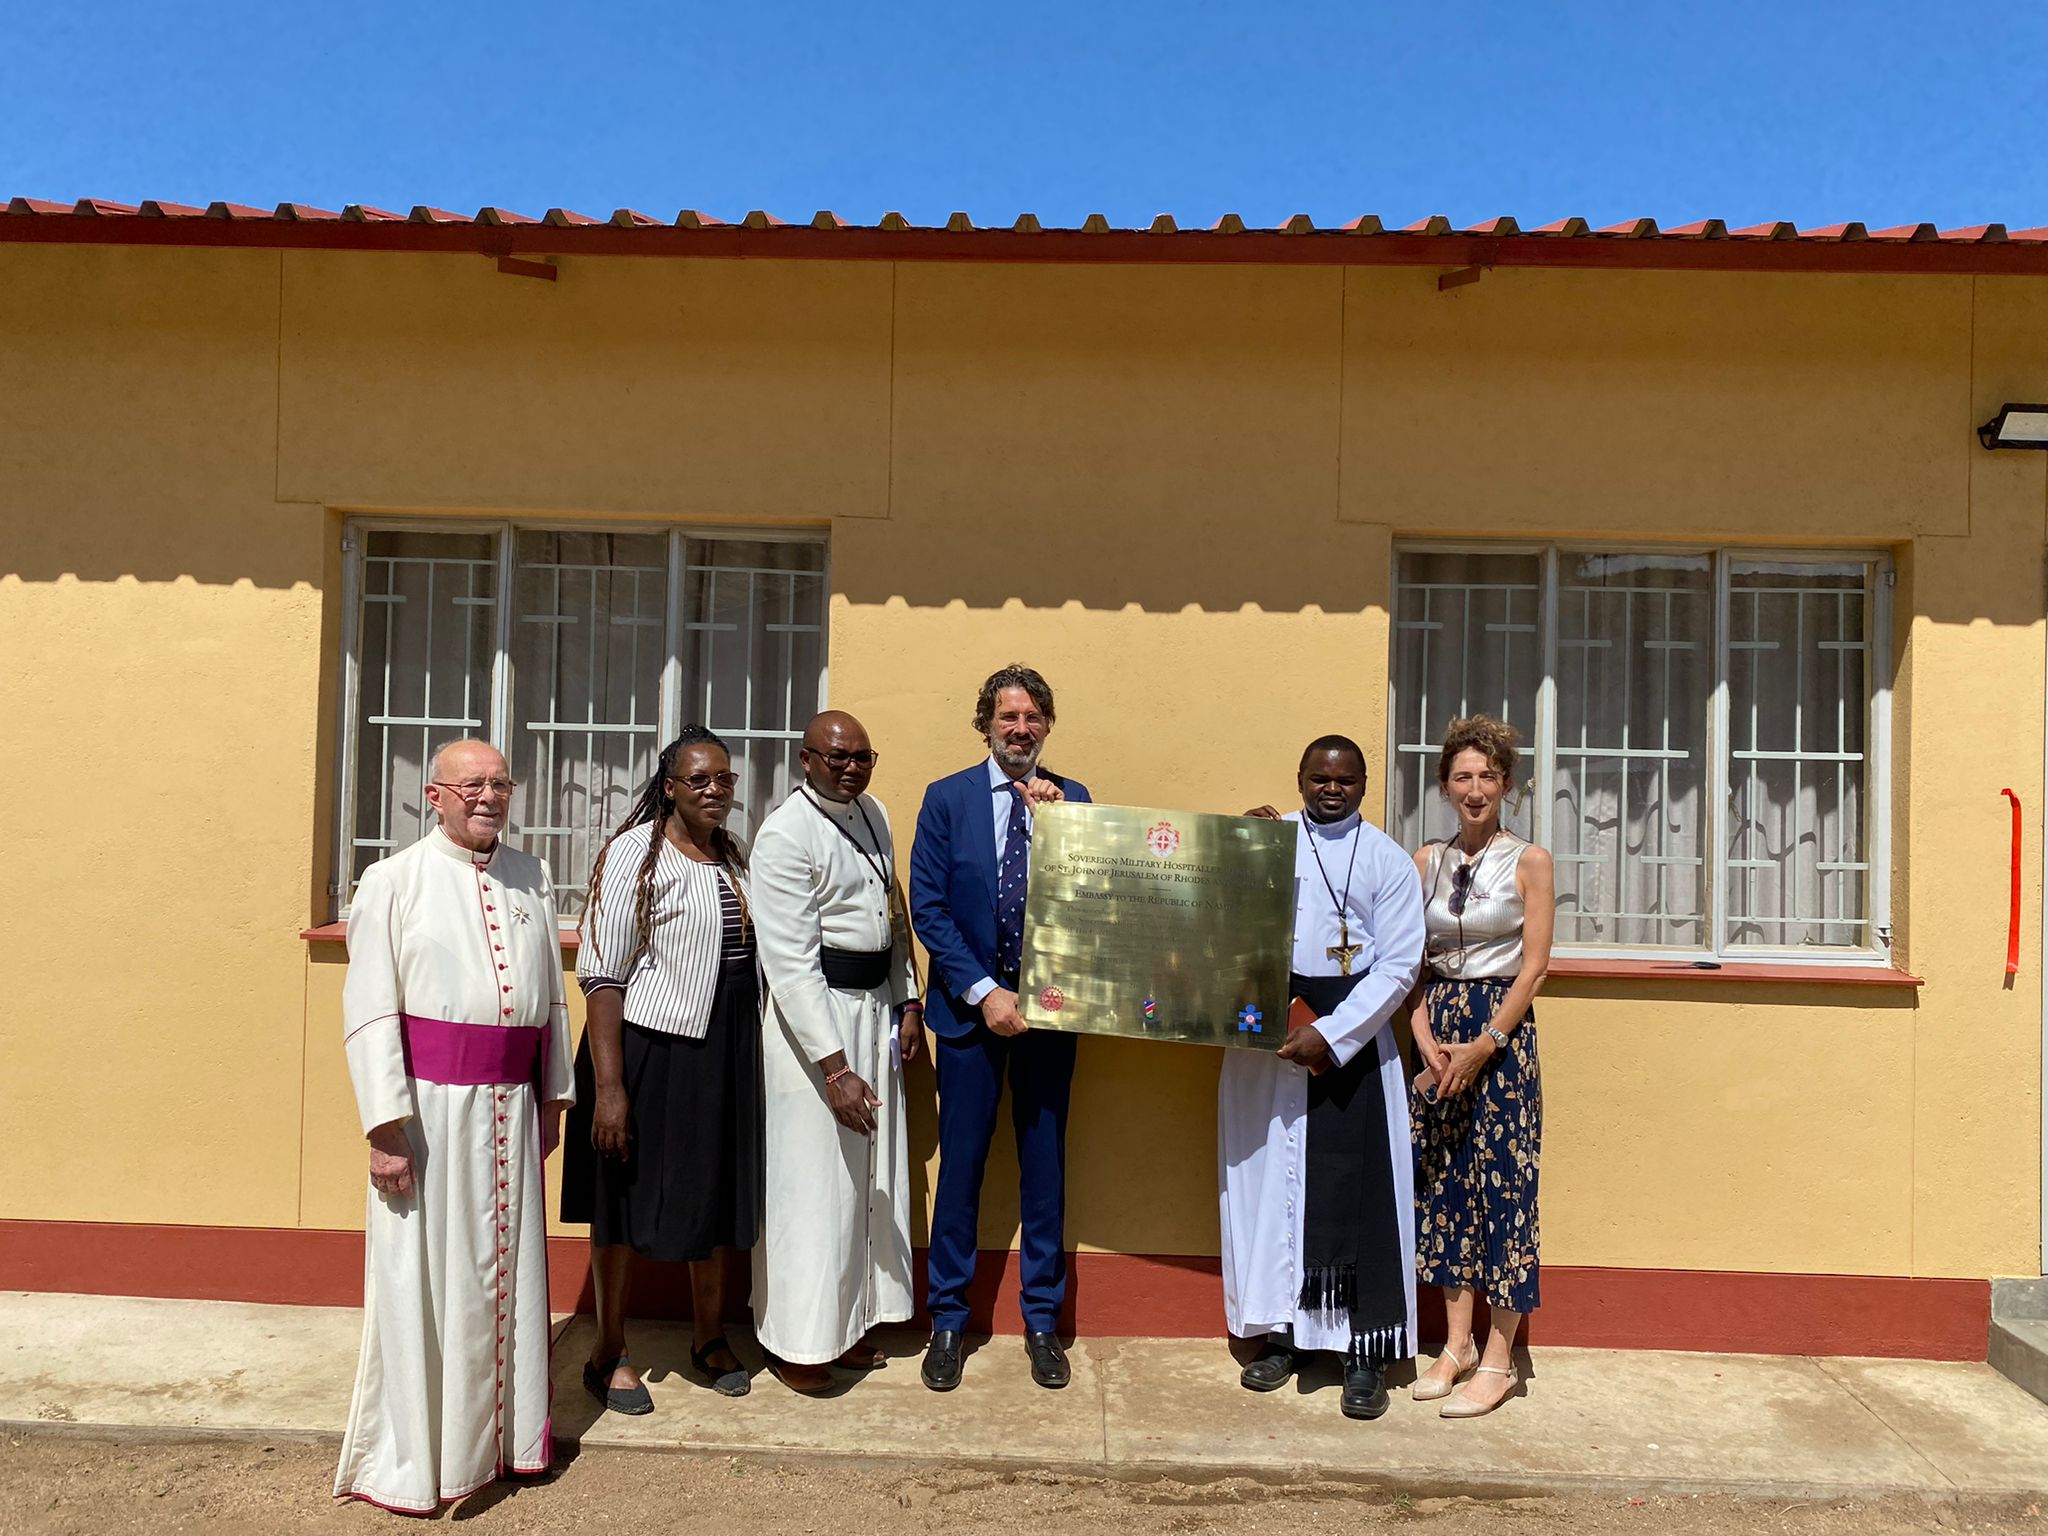 The Order’s embassy to Namibia inaugurates a new professional school in Döbra